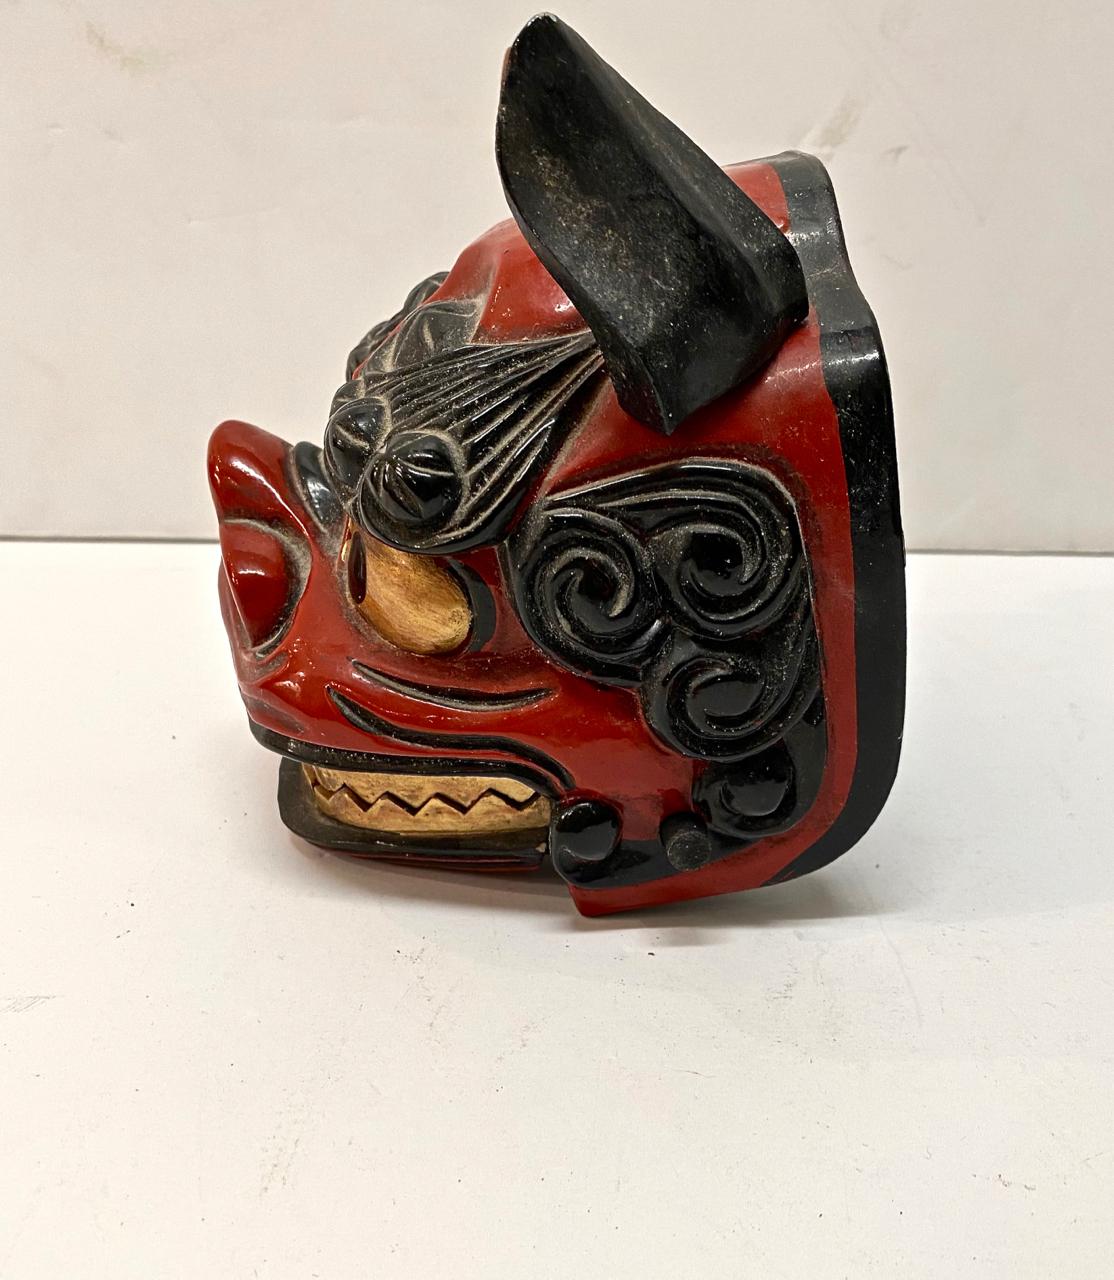 Traditional Japanese lion mask dating to the mid-20th century. The masks is in overall very good condition and would make an eye-catcher decorative element. Lion masks were used in the performance of the lion dance of the Matsuri Festival. The